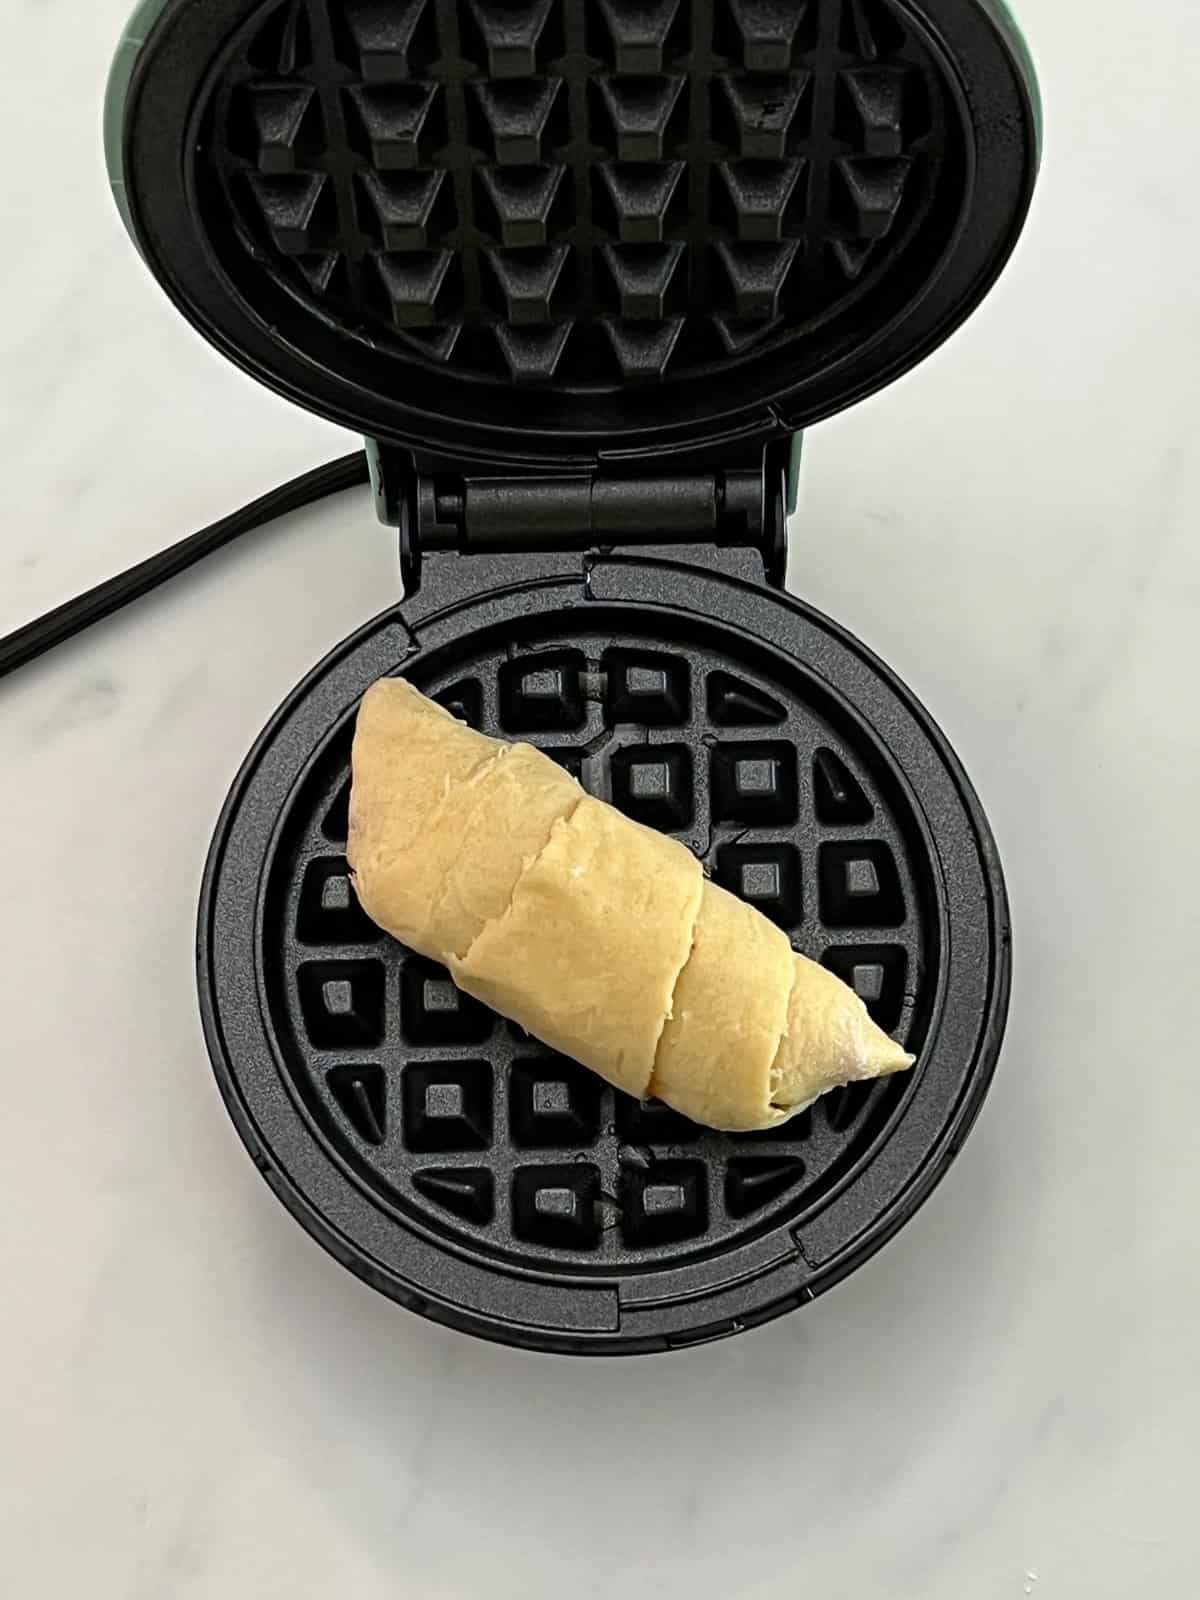 Crescent roll placed in waffle iron.